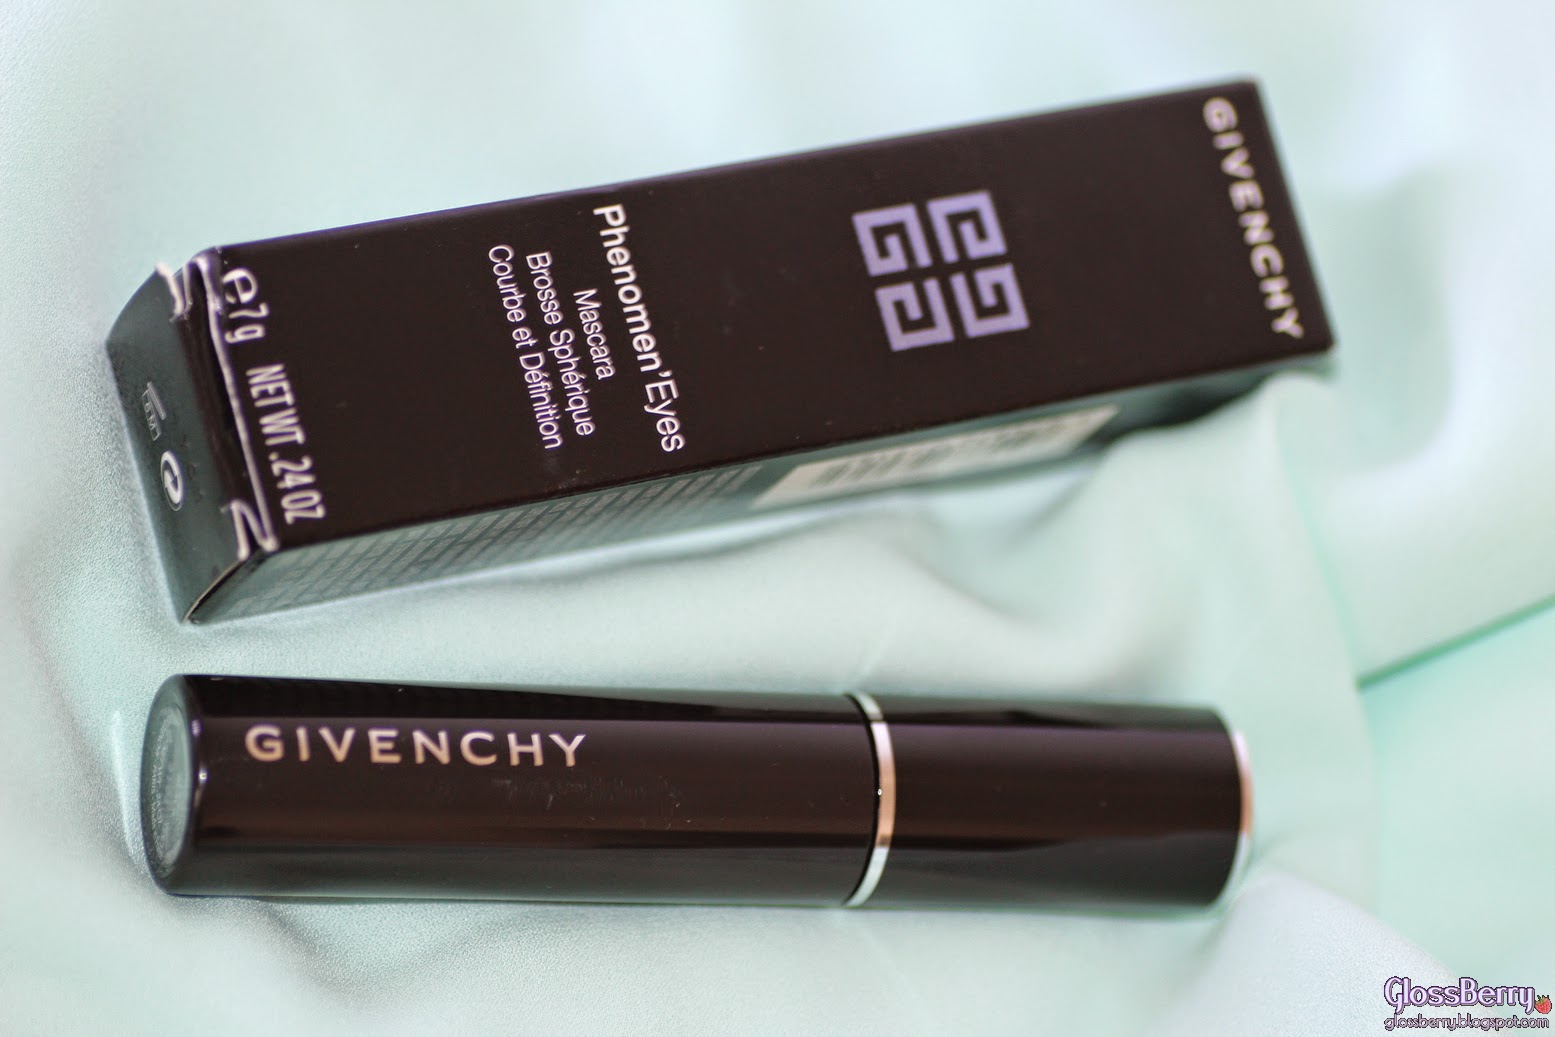  Givenchy - PHENOMEN'EYES Mascara  review swatches renewal new גלוסברי סקירה מסקרה ג'יבנשי ראש עגול קיפוד קיפודי round small head glossberry